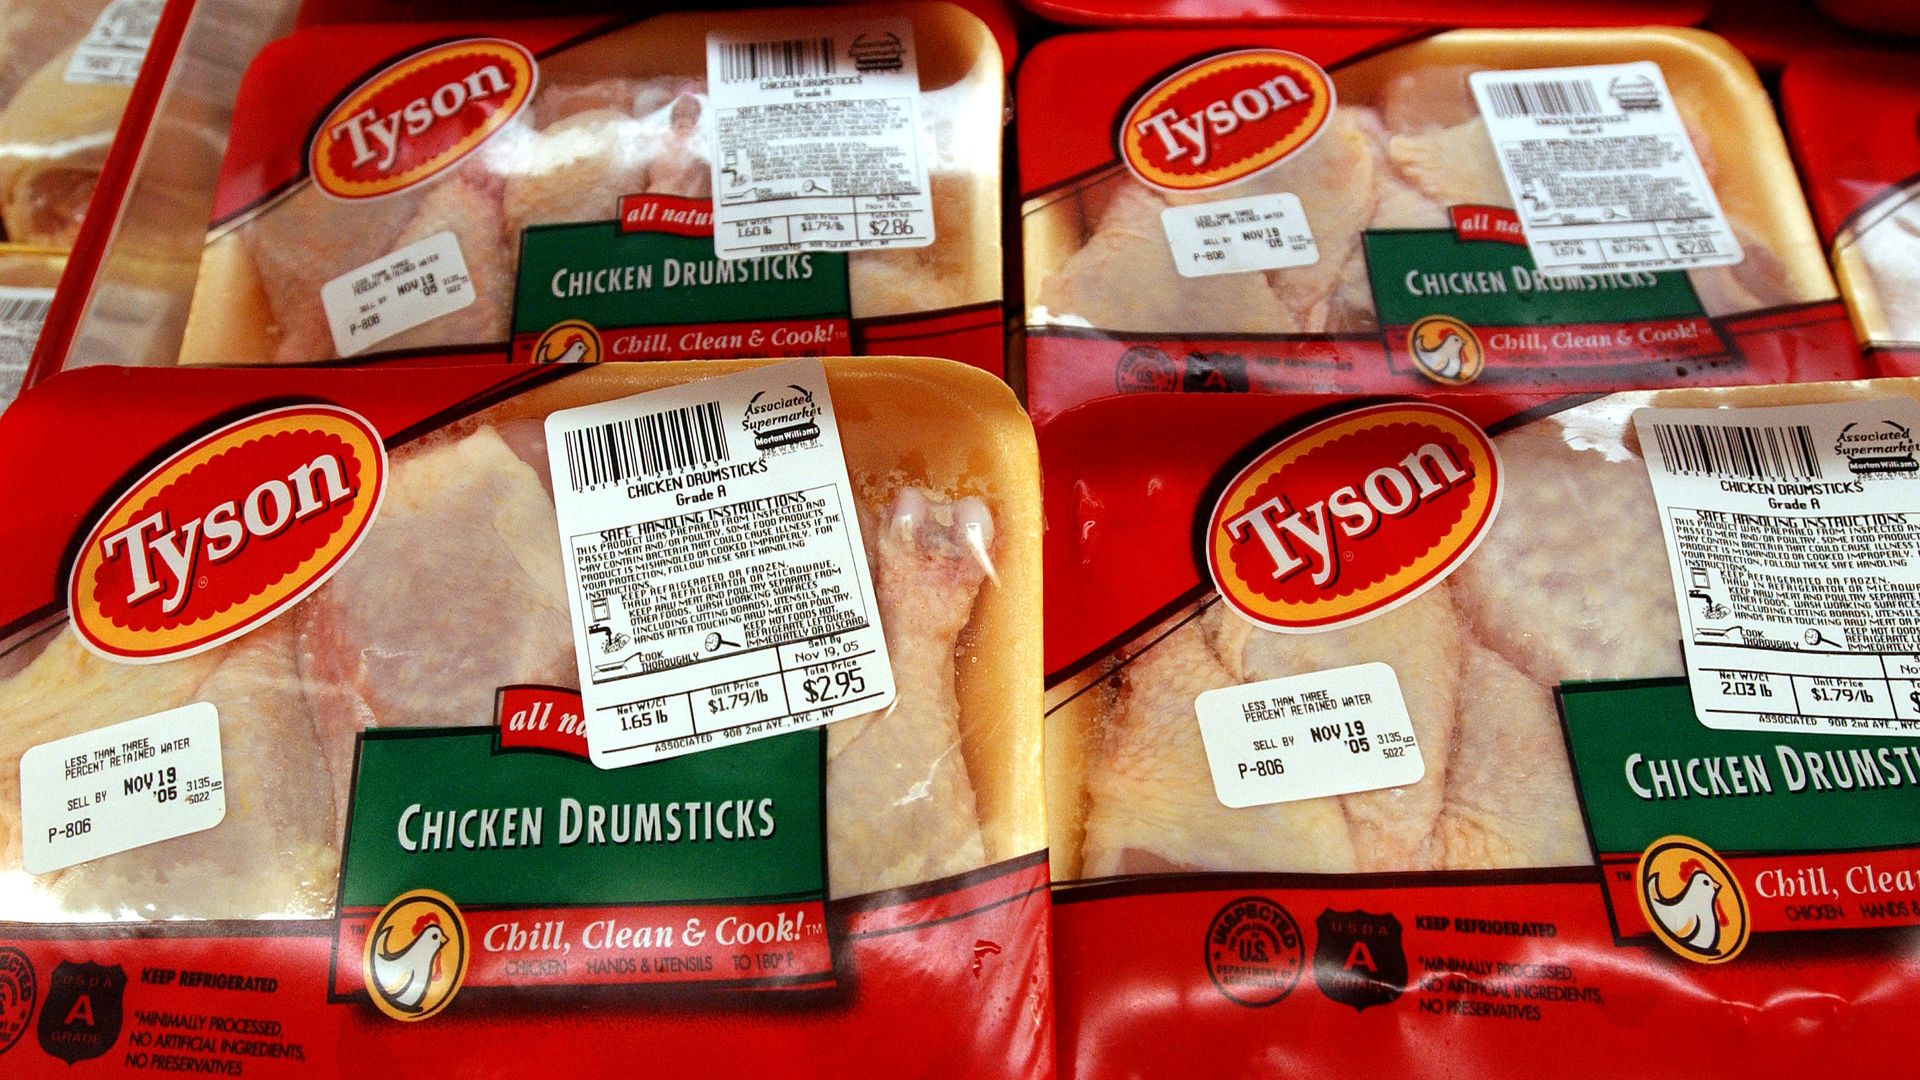 In this image, four packages of frozen chicken drumsticks are shown in a grocery store.